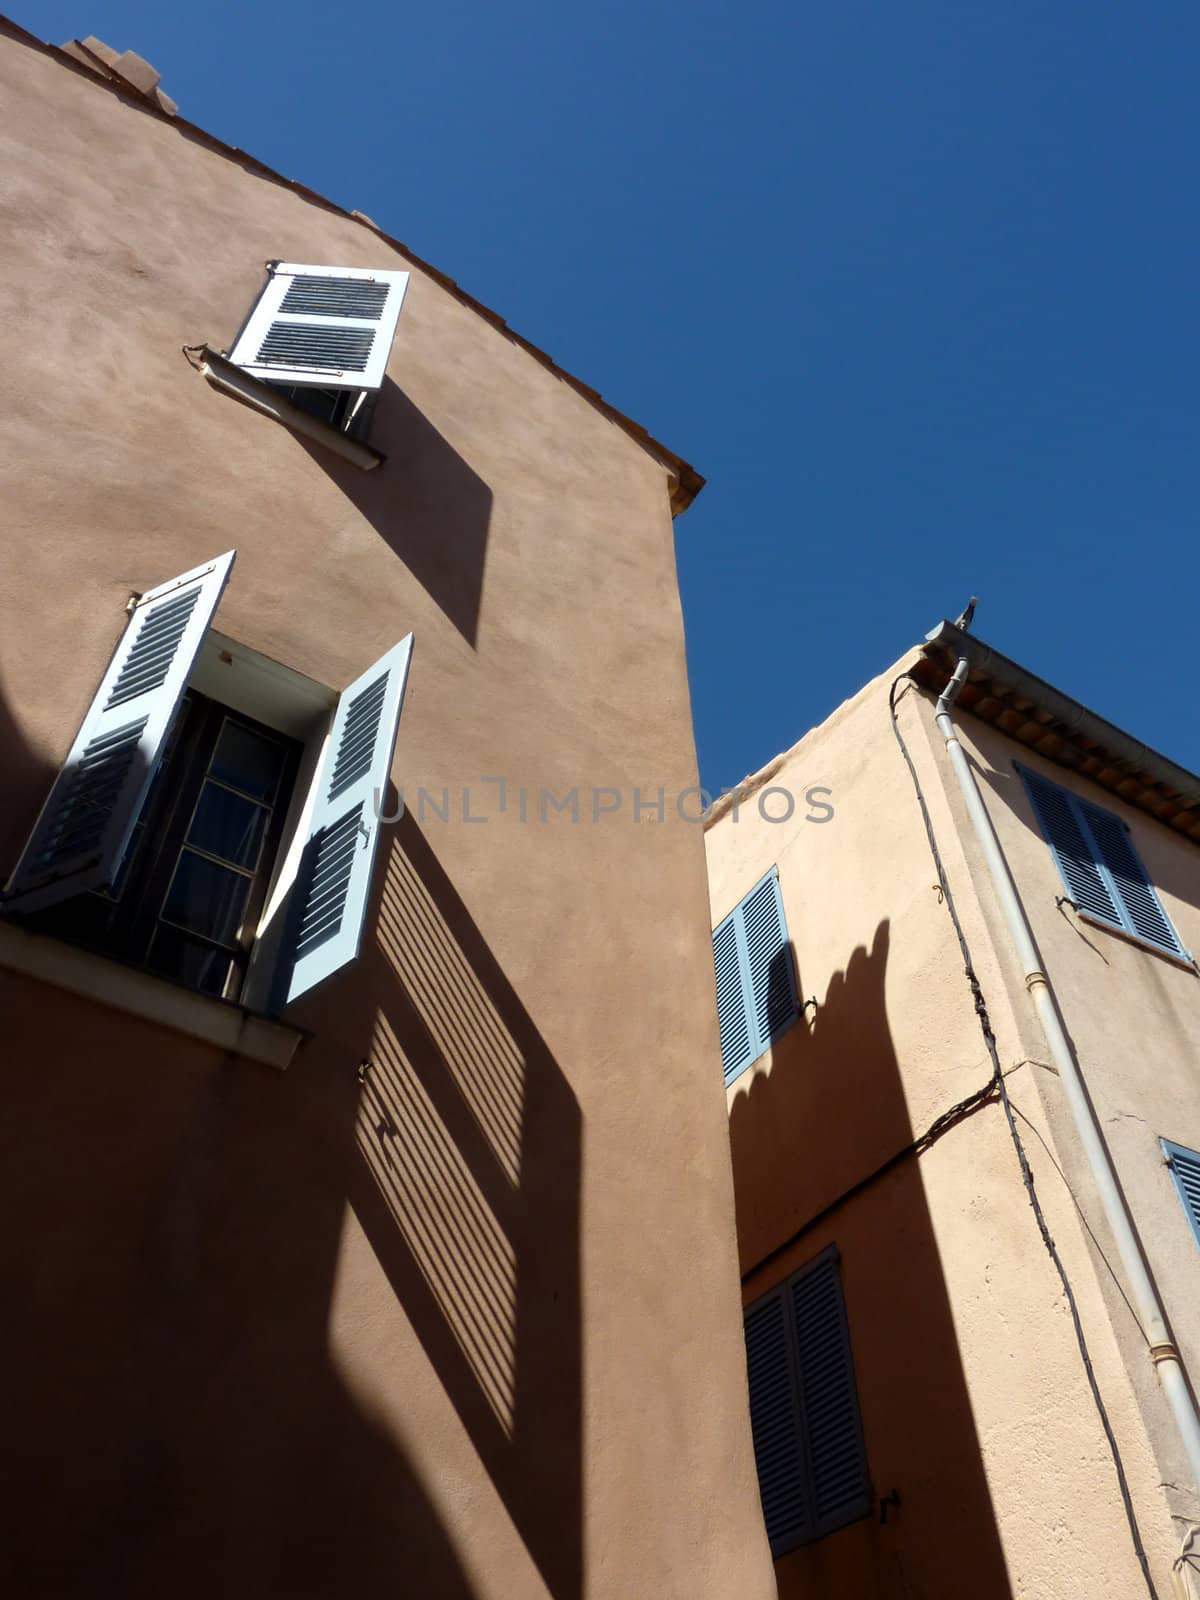 Facades with green shutters and their big shadows in Saint-Tropez, France, by beautiful weather